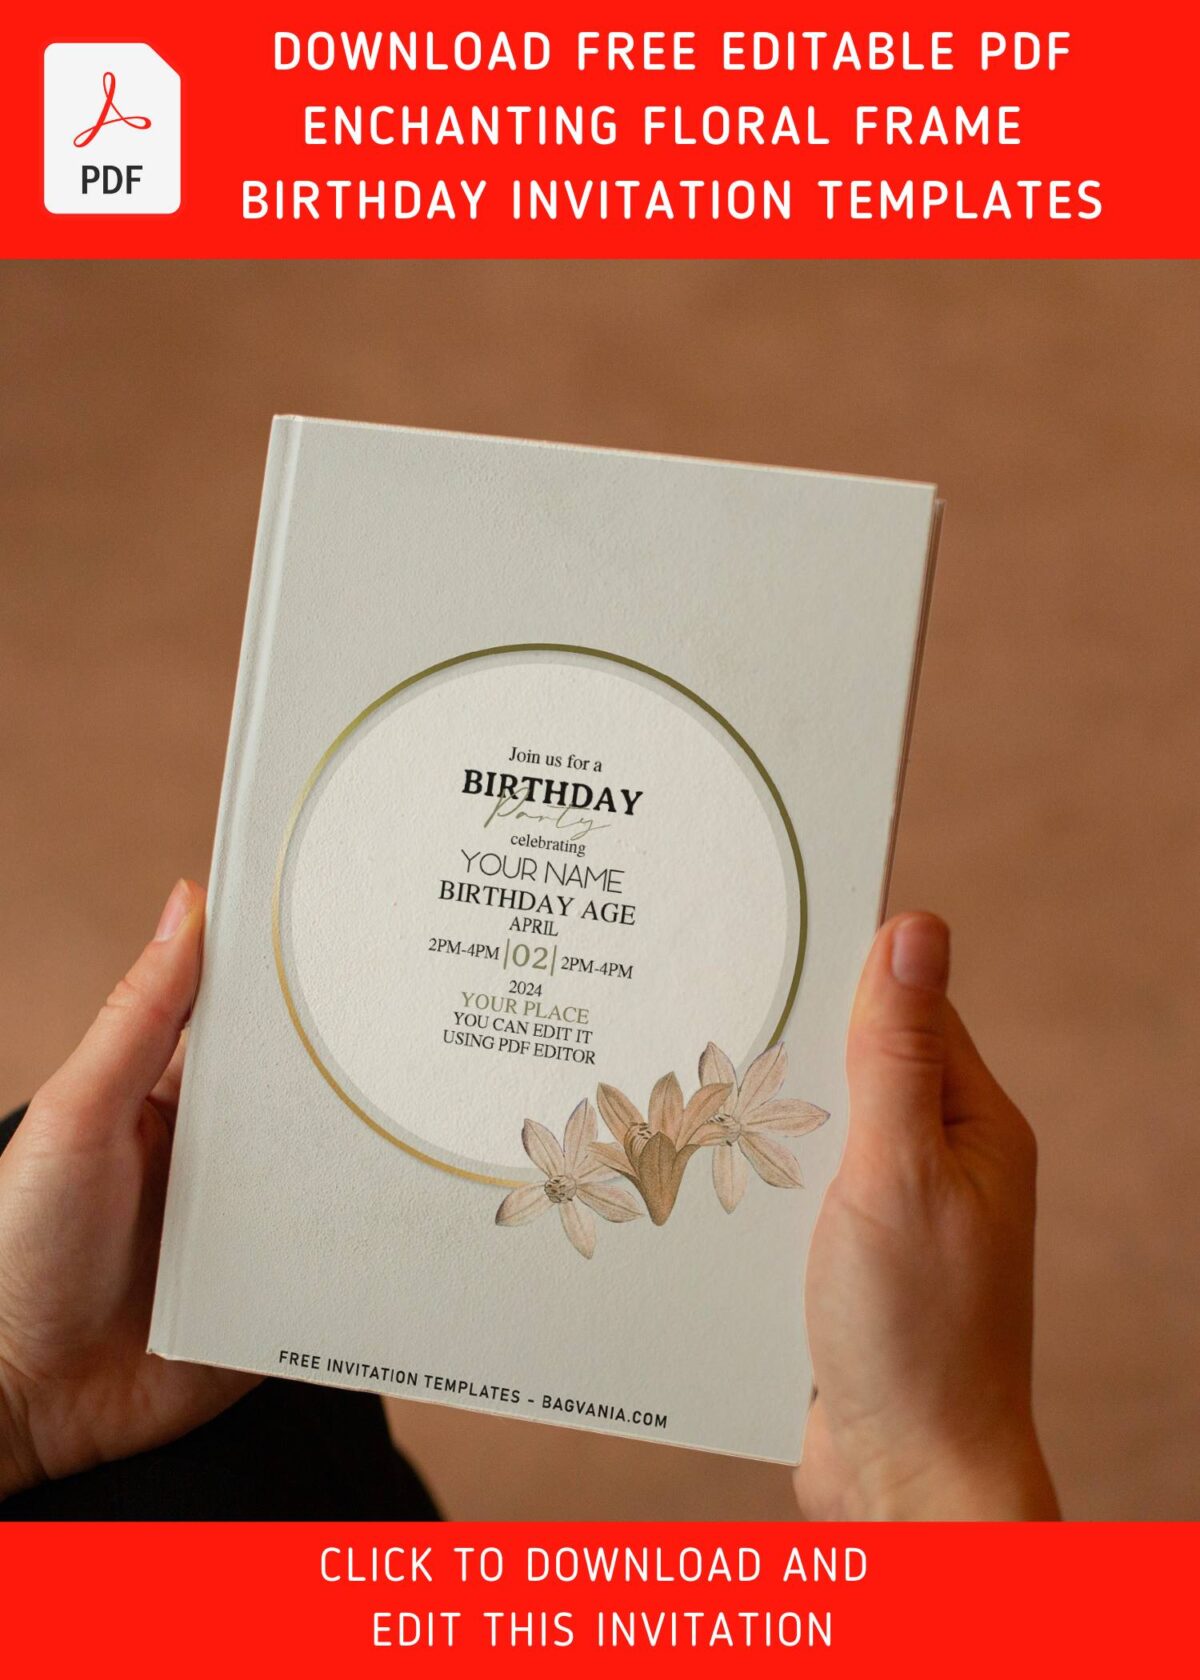 (Free Editable PDF) Attractive Floral Frame Birthday Invitation Templates with stunning gold round-shaped text frame